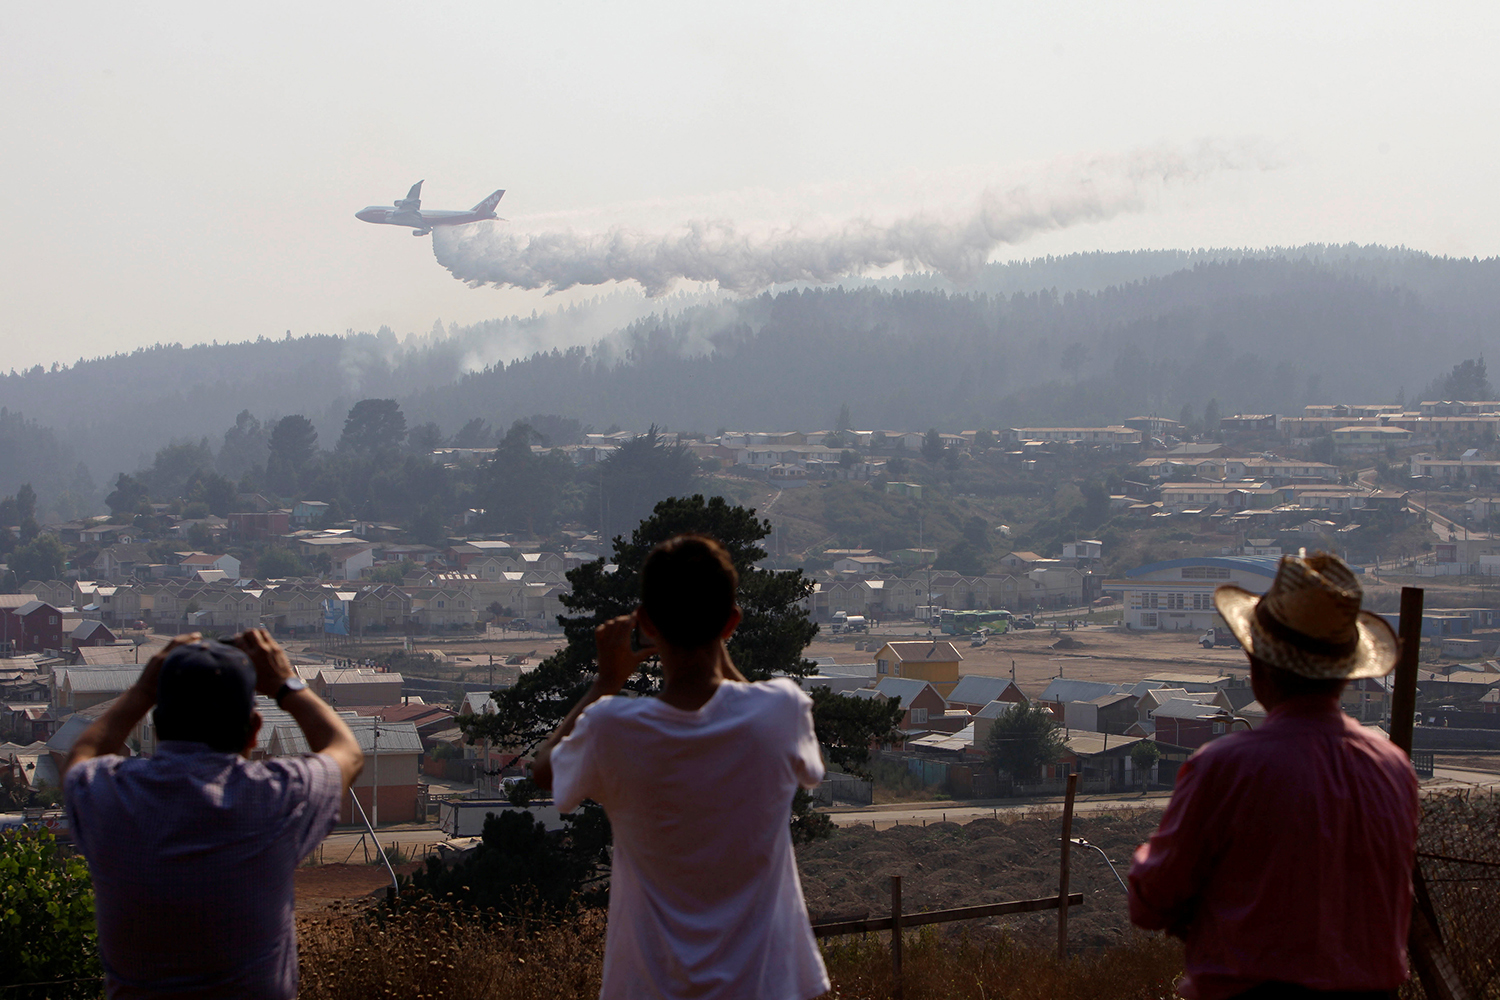 DICHATO 2017-01-31 A Boeing 747-400 Super Tanker from the U.S. drops water to extinguish wildfires in Chile's central-south regions, in Dichato, Chile January 31, 2017. REUTERS/Maribel Fornerod EDITORIAL USE ONLY. NO RESALES. NO ARCHIVE. TPX IMAGES OF THE DAY Photo: / REUTERS / TT / kod 72000